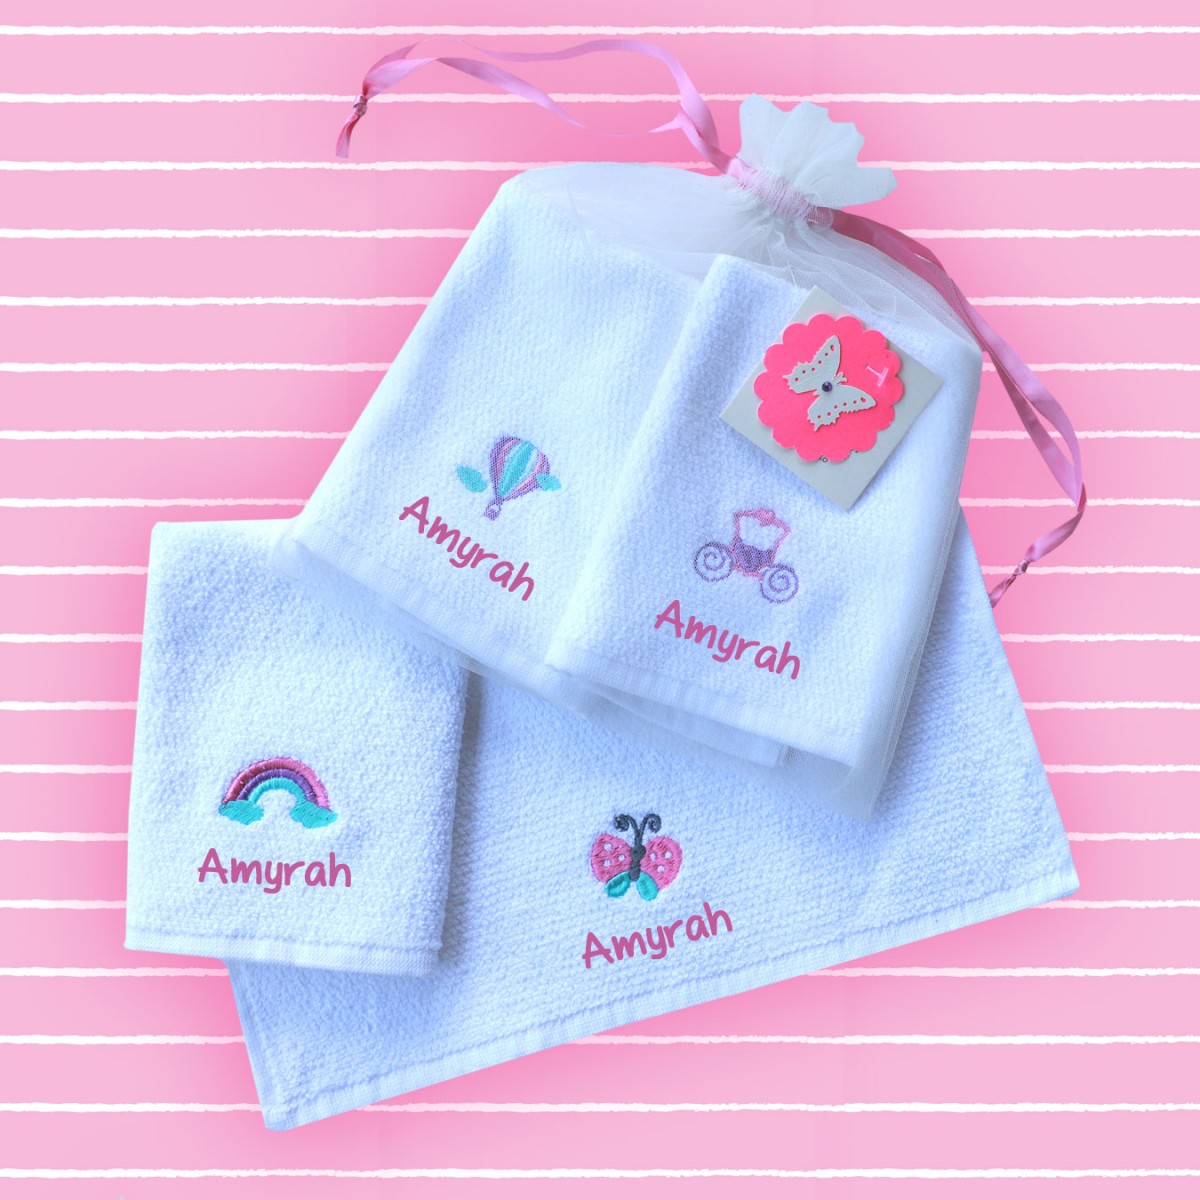 A Fairytale - Set of 10 Face Towels